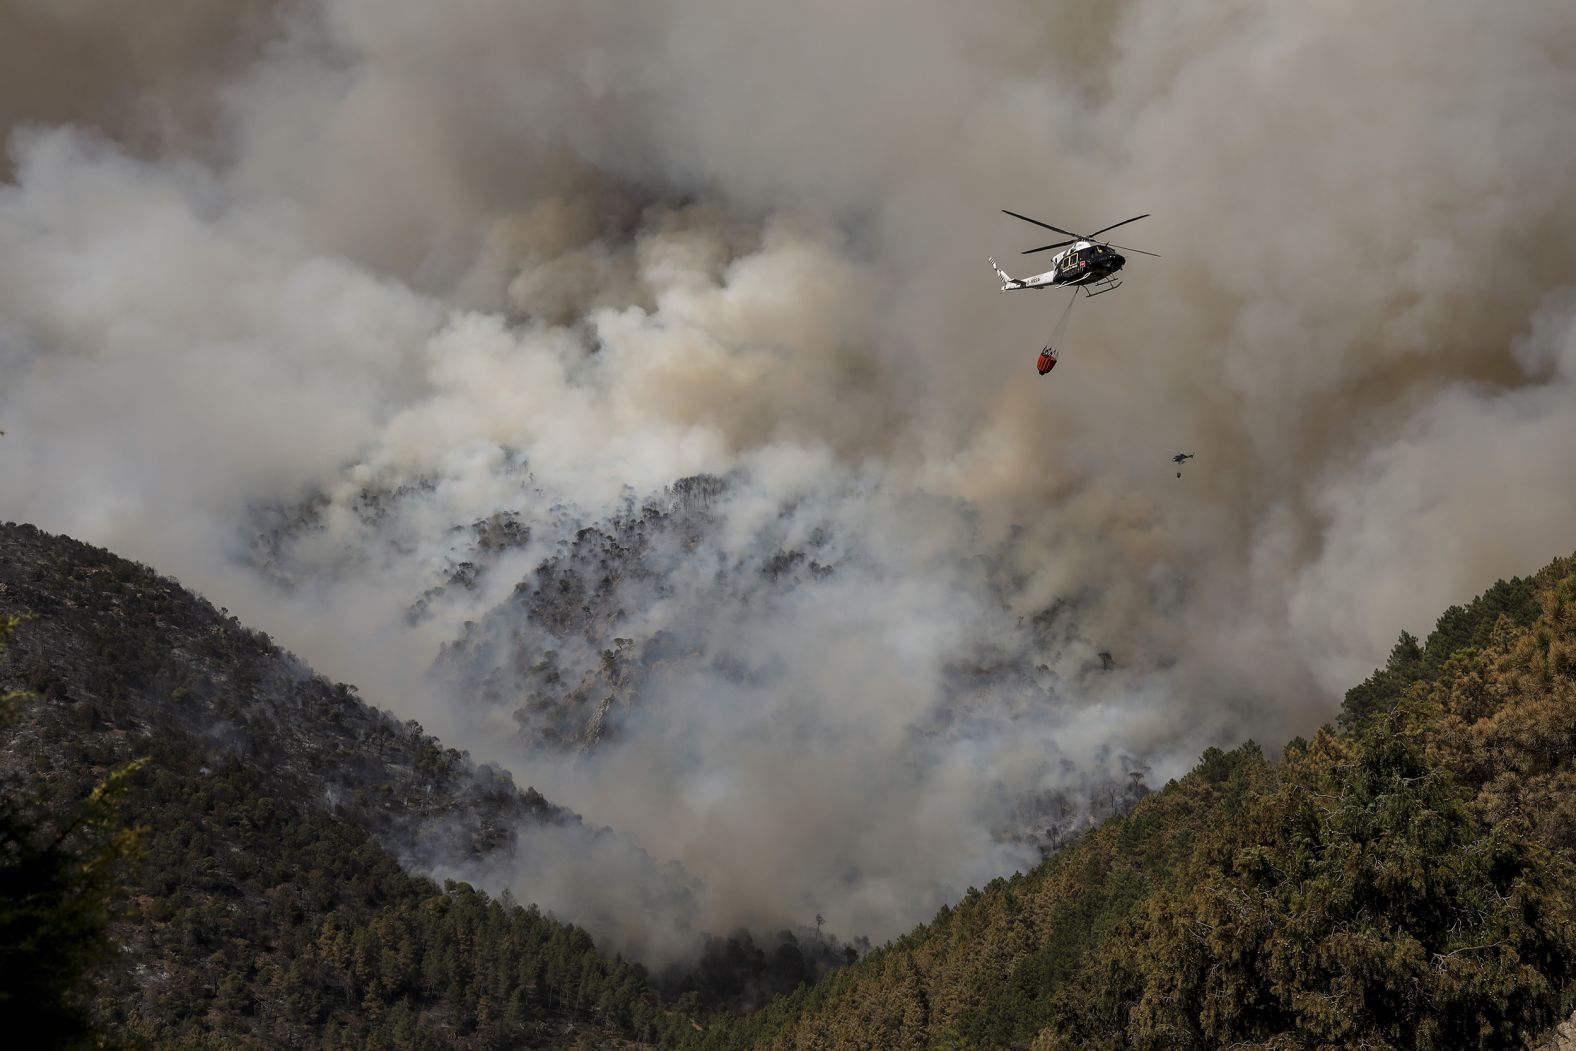 Helicopters drop water above a fire in Avila, Spain, on July 18.